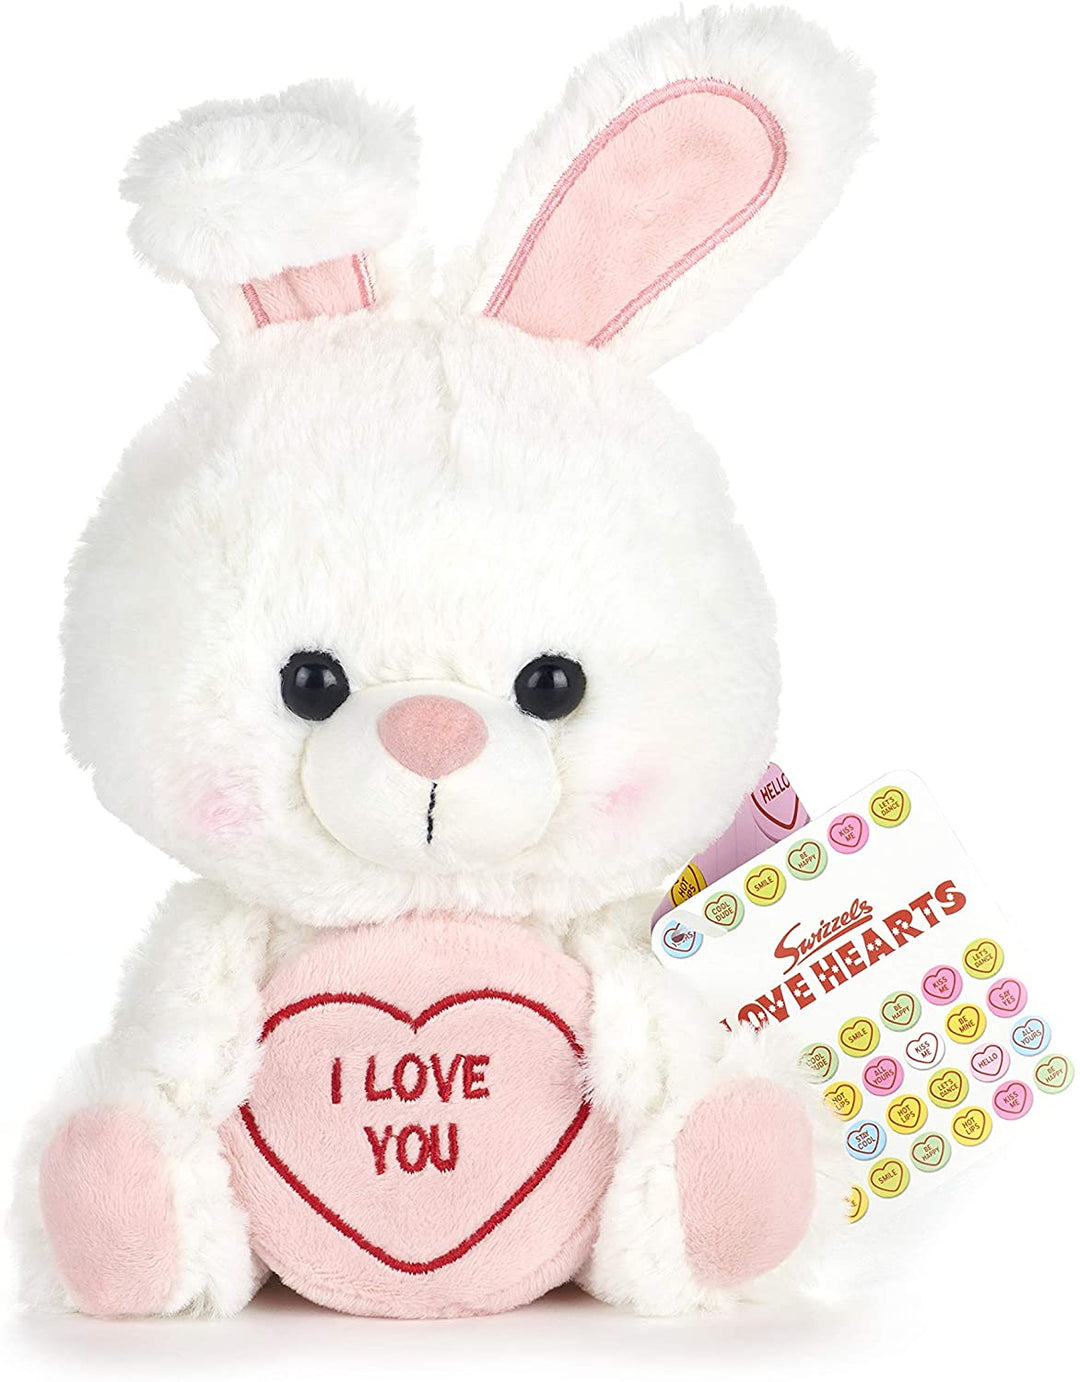 Posh Paws 37328 Swizzels Hearts 18cm (7”) Bunny – I Love You Message Soft Toy, Pink & White